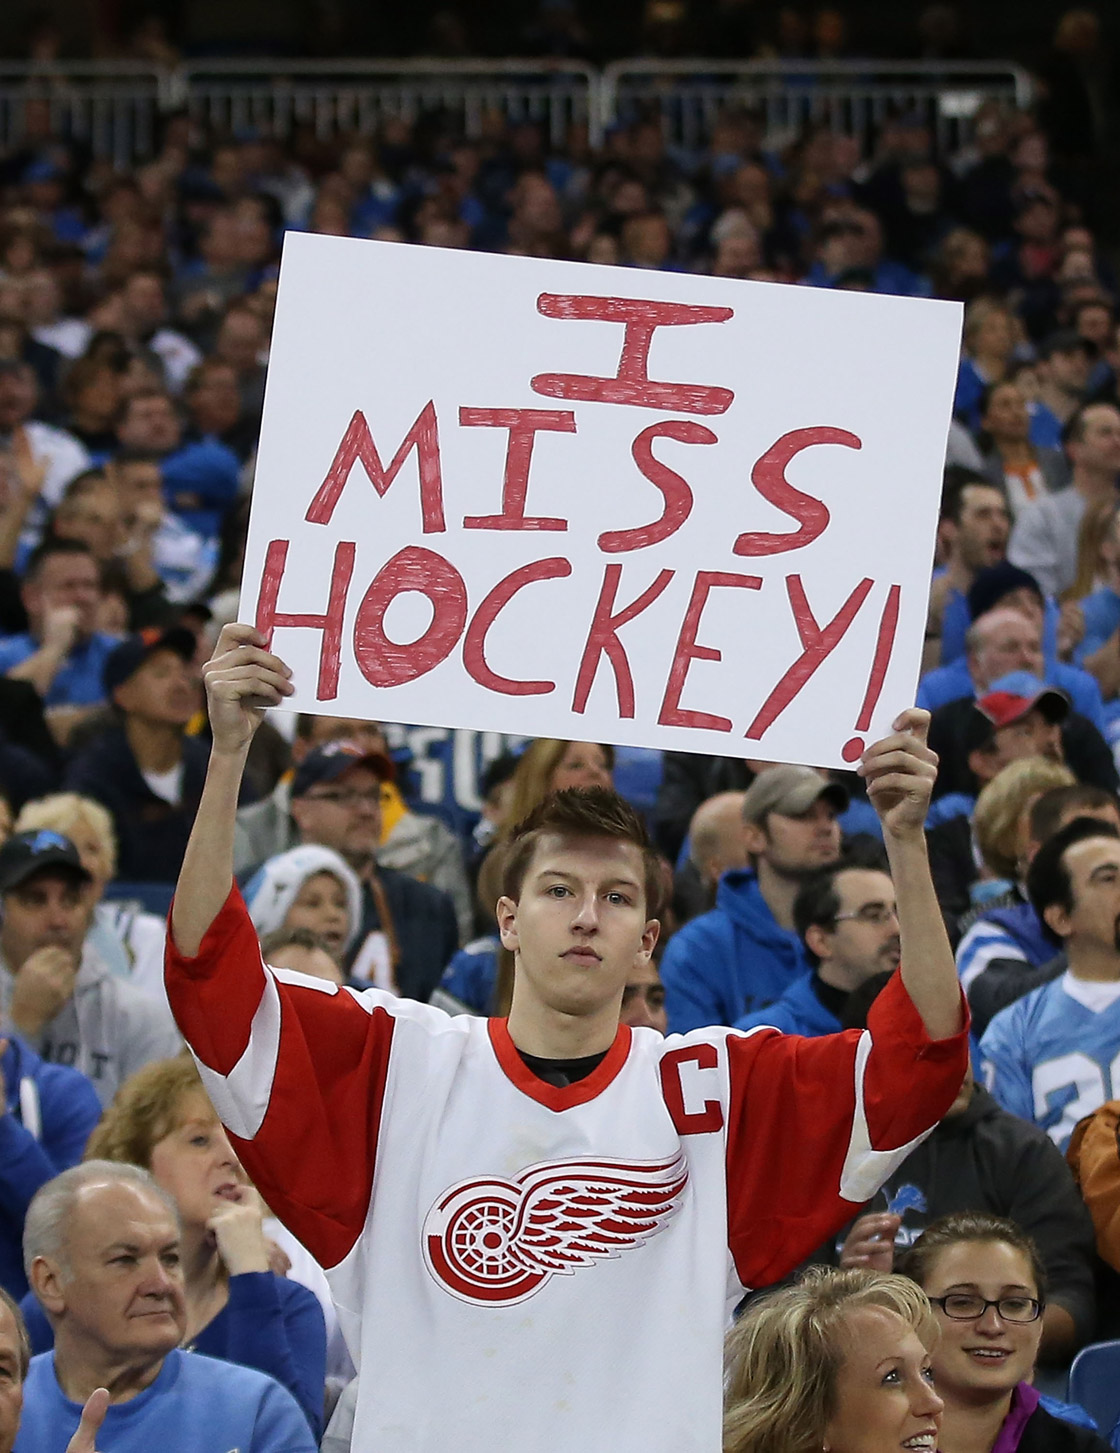 A Detroit Red Wings hockey fan shows his team support during the game between the Chicago Bears and the Detroit Lions at Ford Field on December 30, 2012 in Detroit, Michigan.